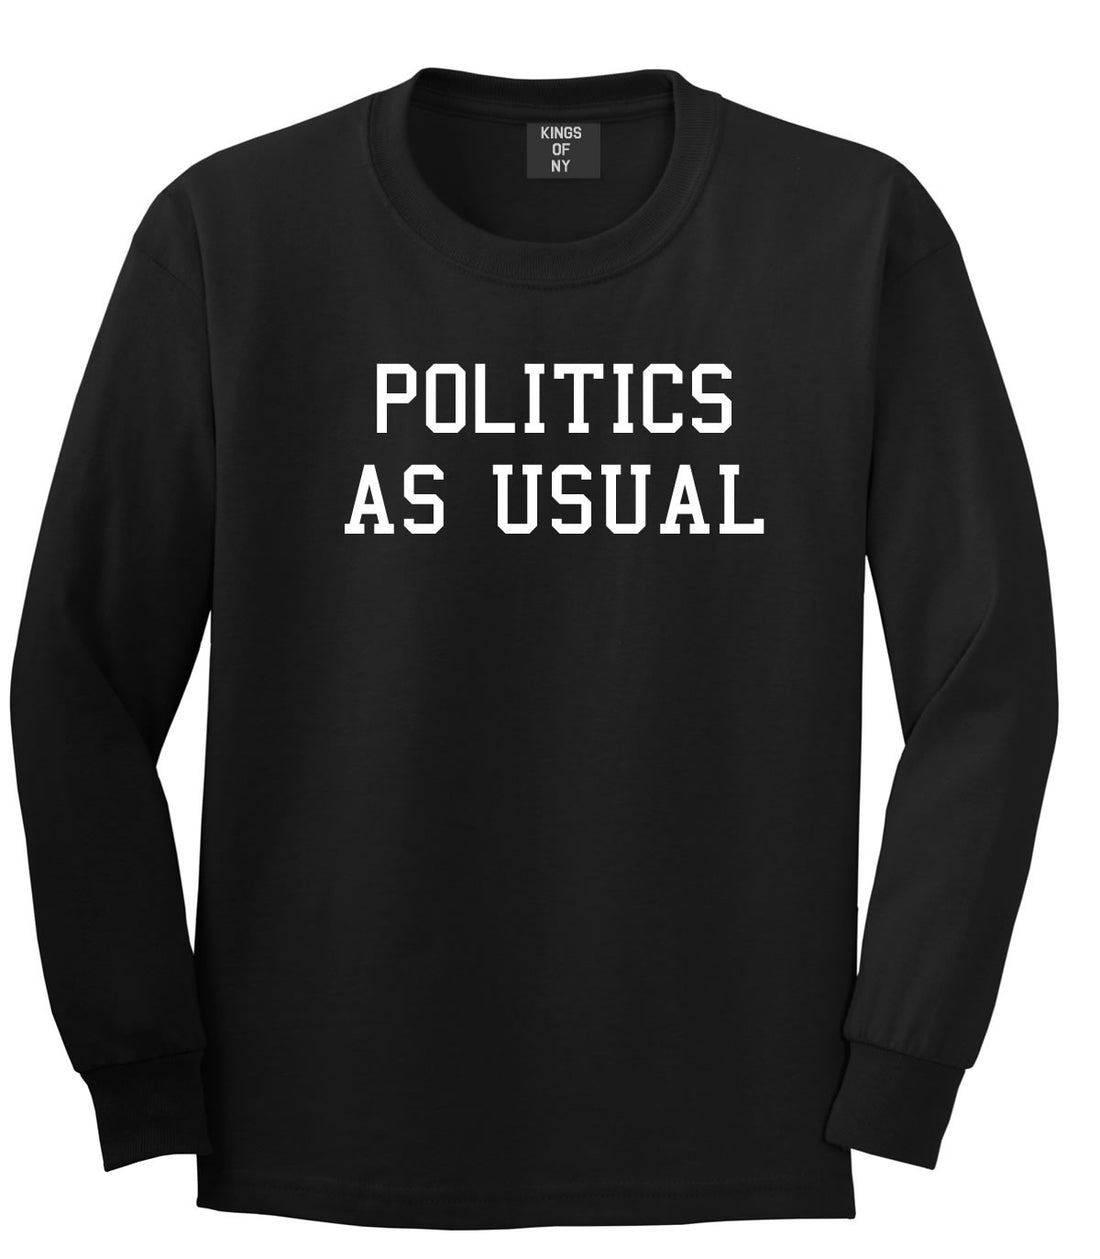 Politics As Usual Hiphop Lyrics Jay 23 Z Old School Long Sleeve T-Shirt In Black by Kings Of NY